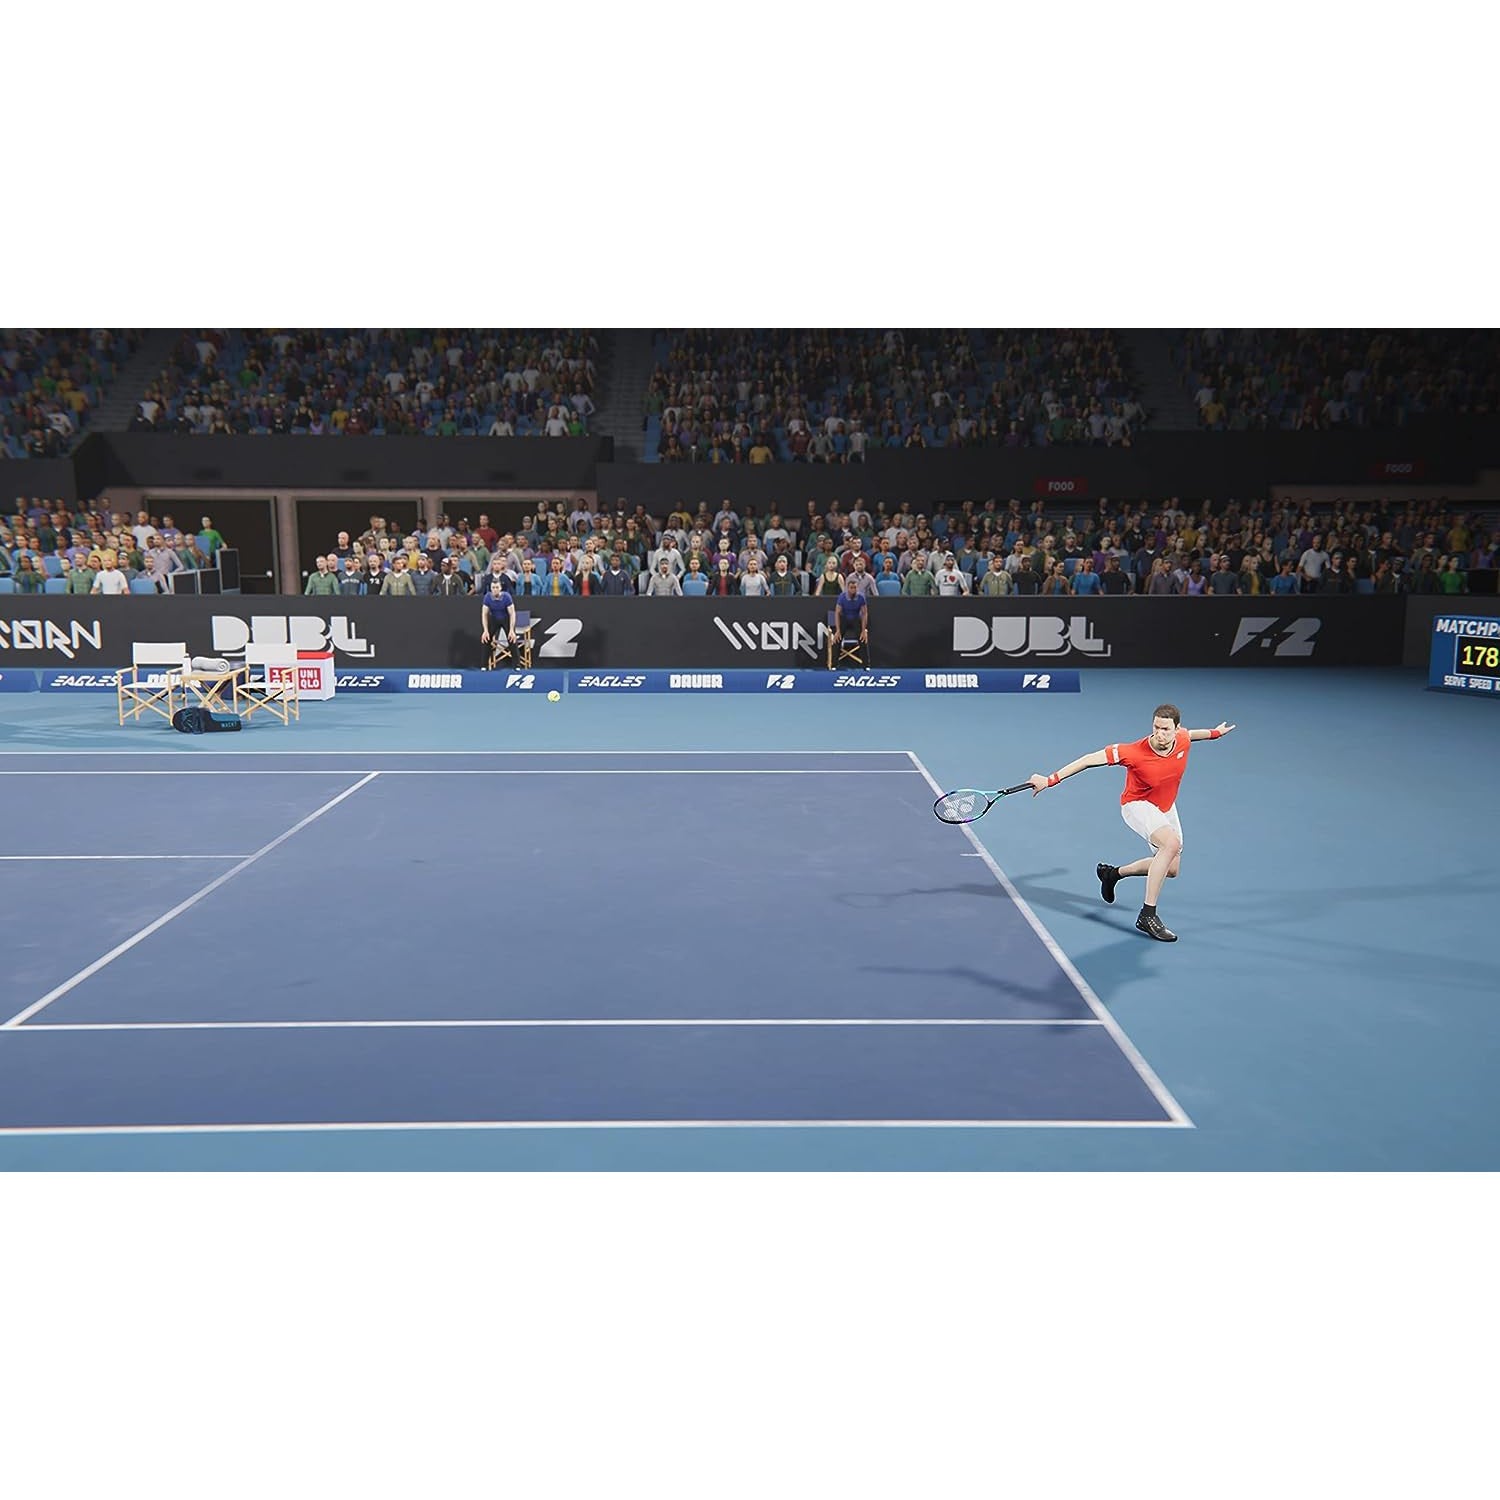 Matchpoint - Tennis Championships: Legends Edition (PS5)